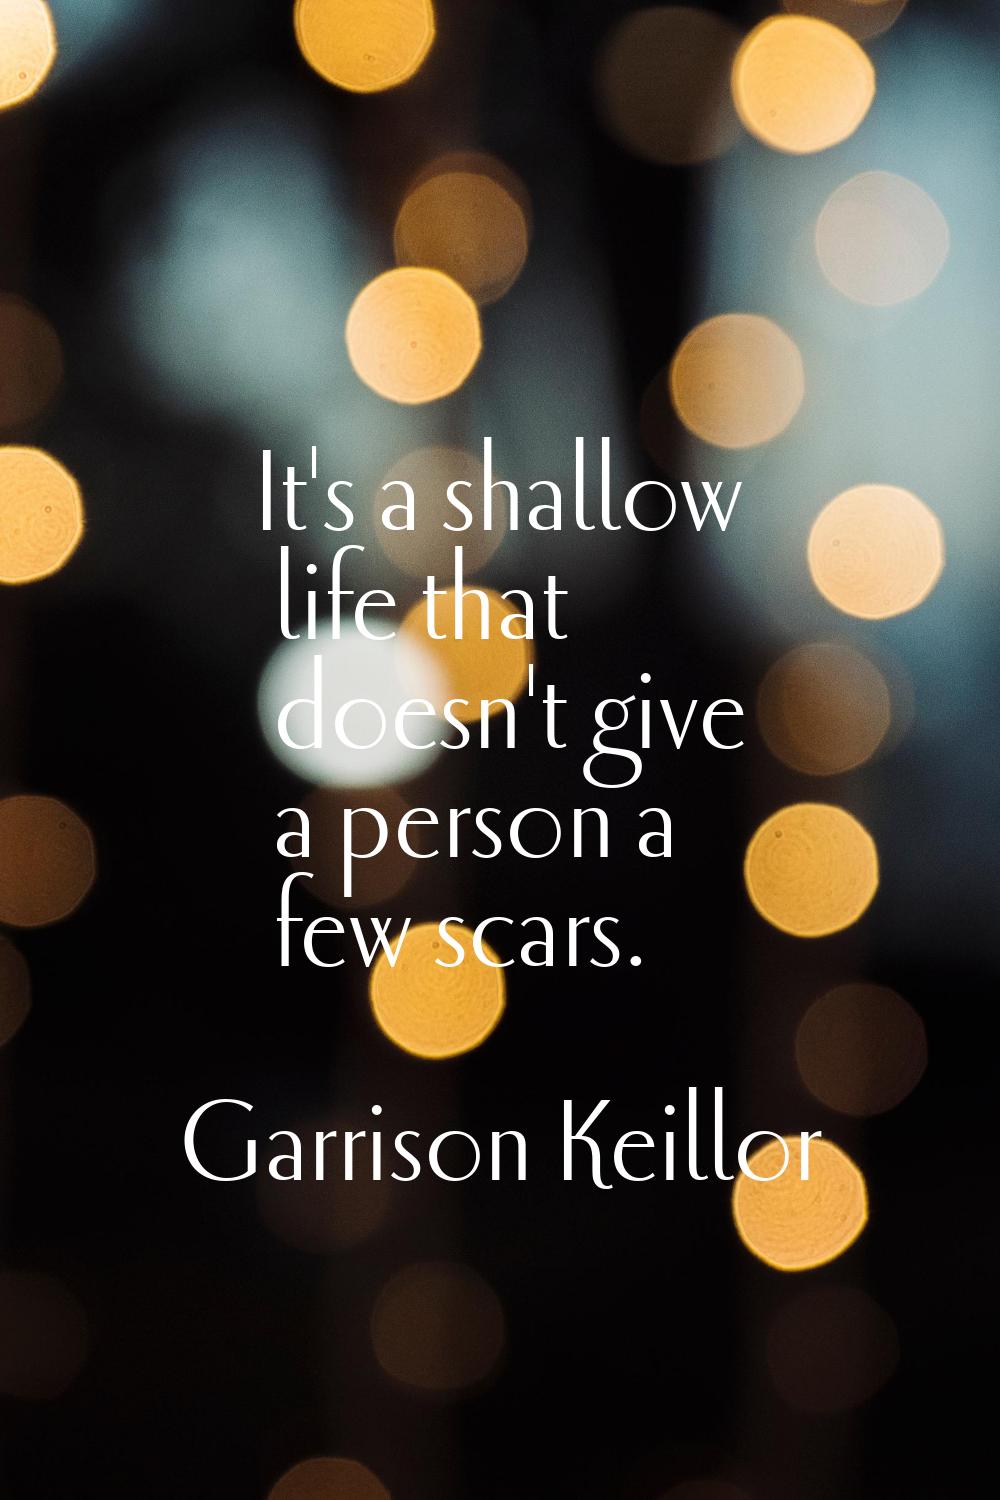 It's a shallow life that doesn't give a person a few scars.